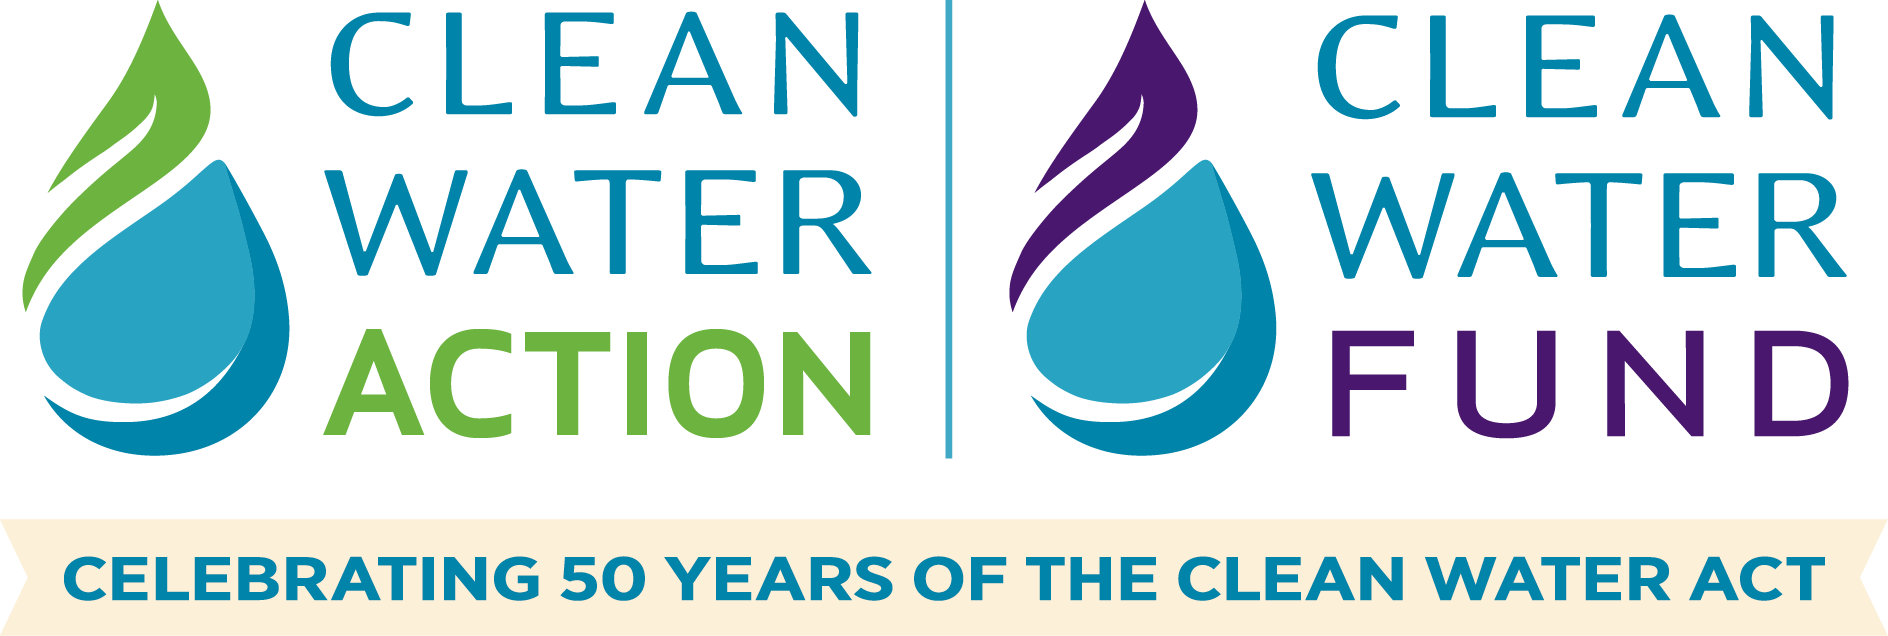 Clean Water Action & Clean Water Fund: Celebrating 50 Years of the Clean Water Act 